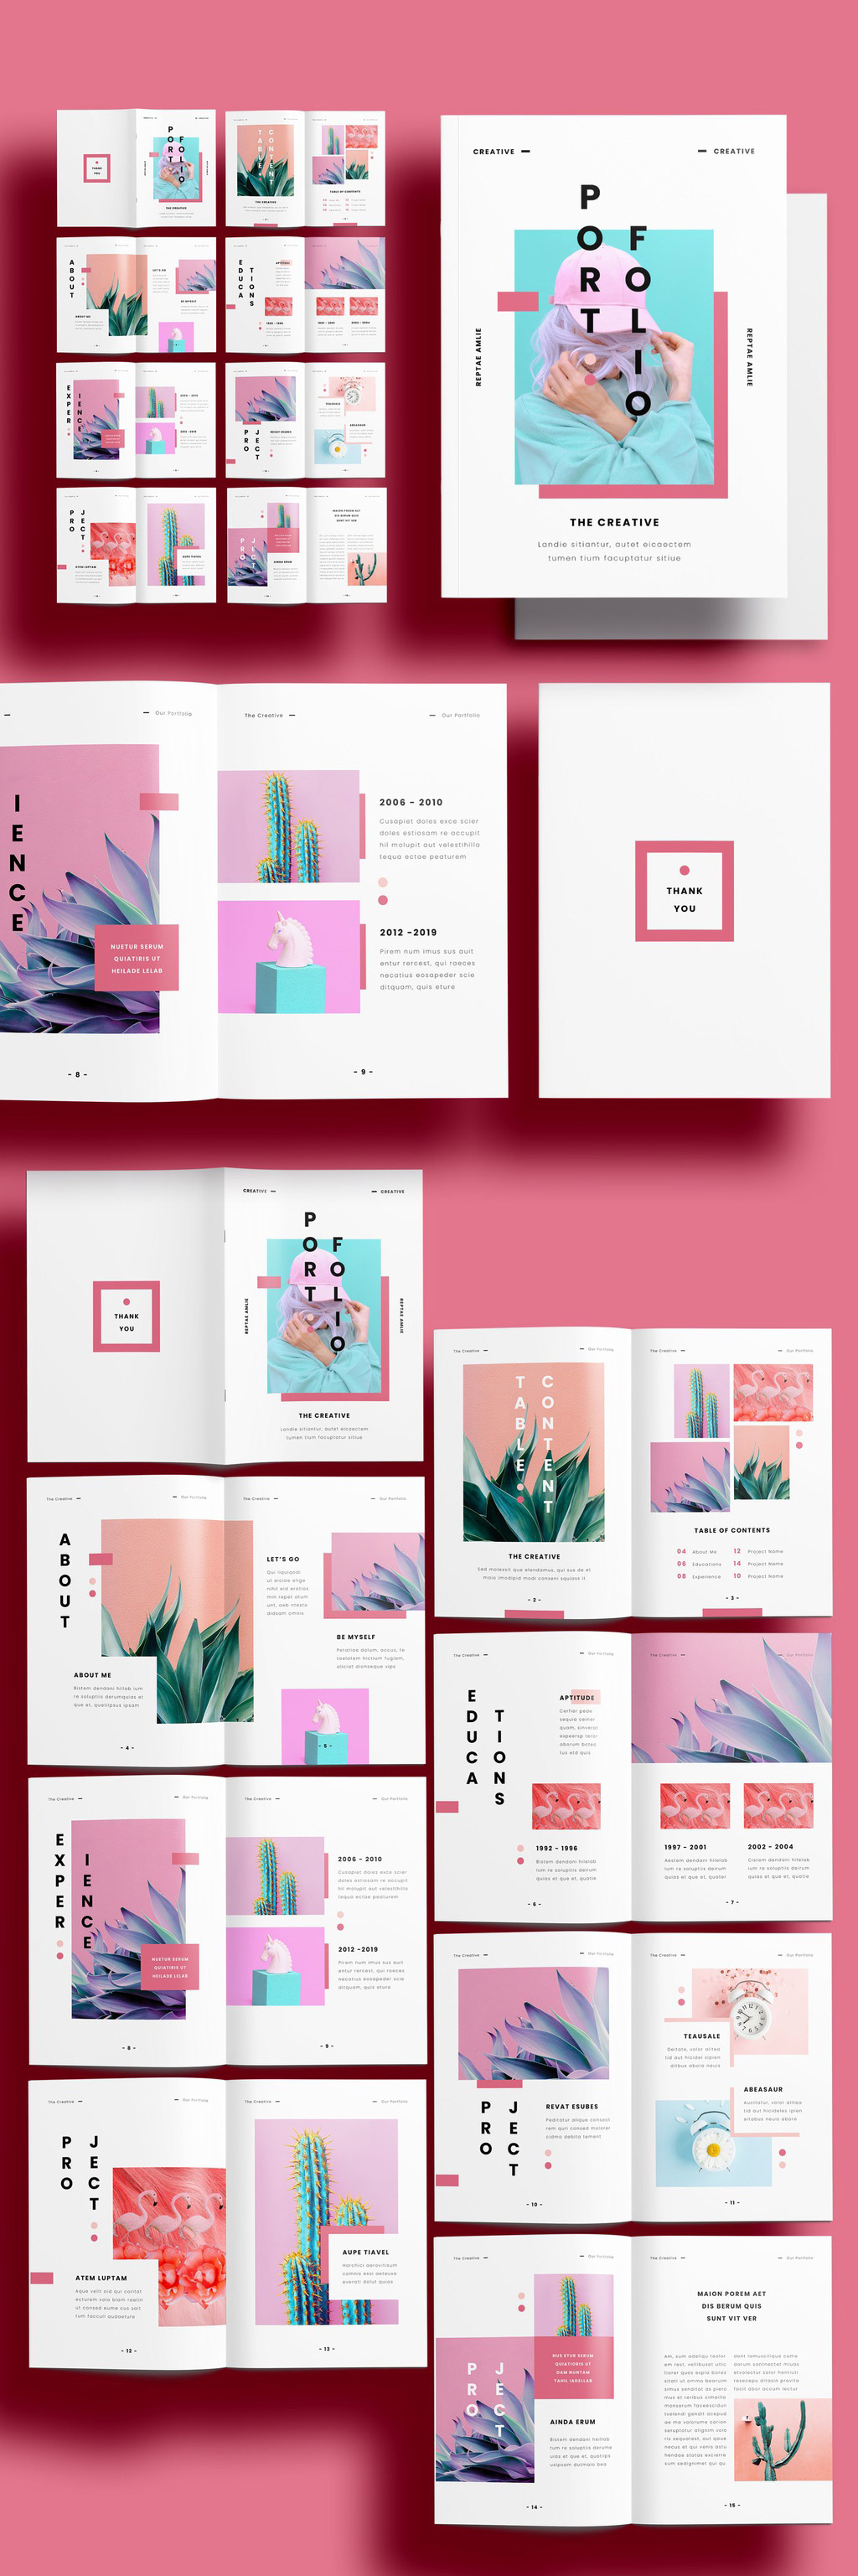 A Fashionable Pink Portfolio Template for Adobe InDesign